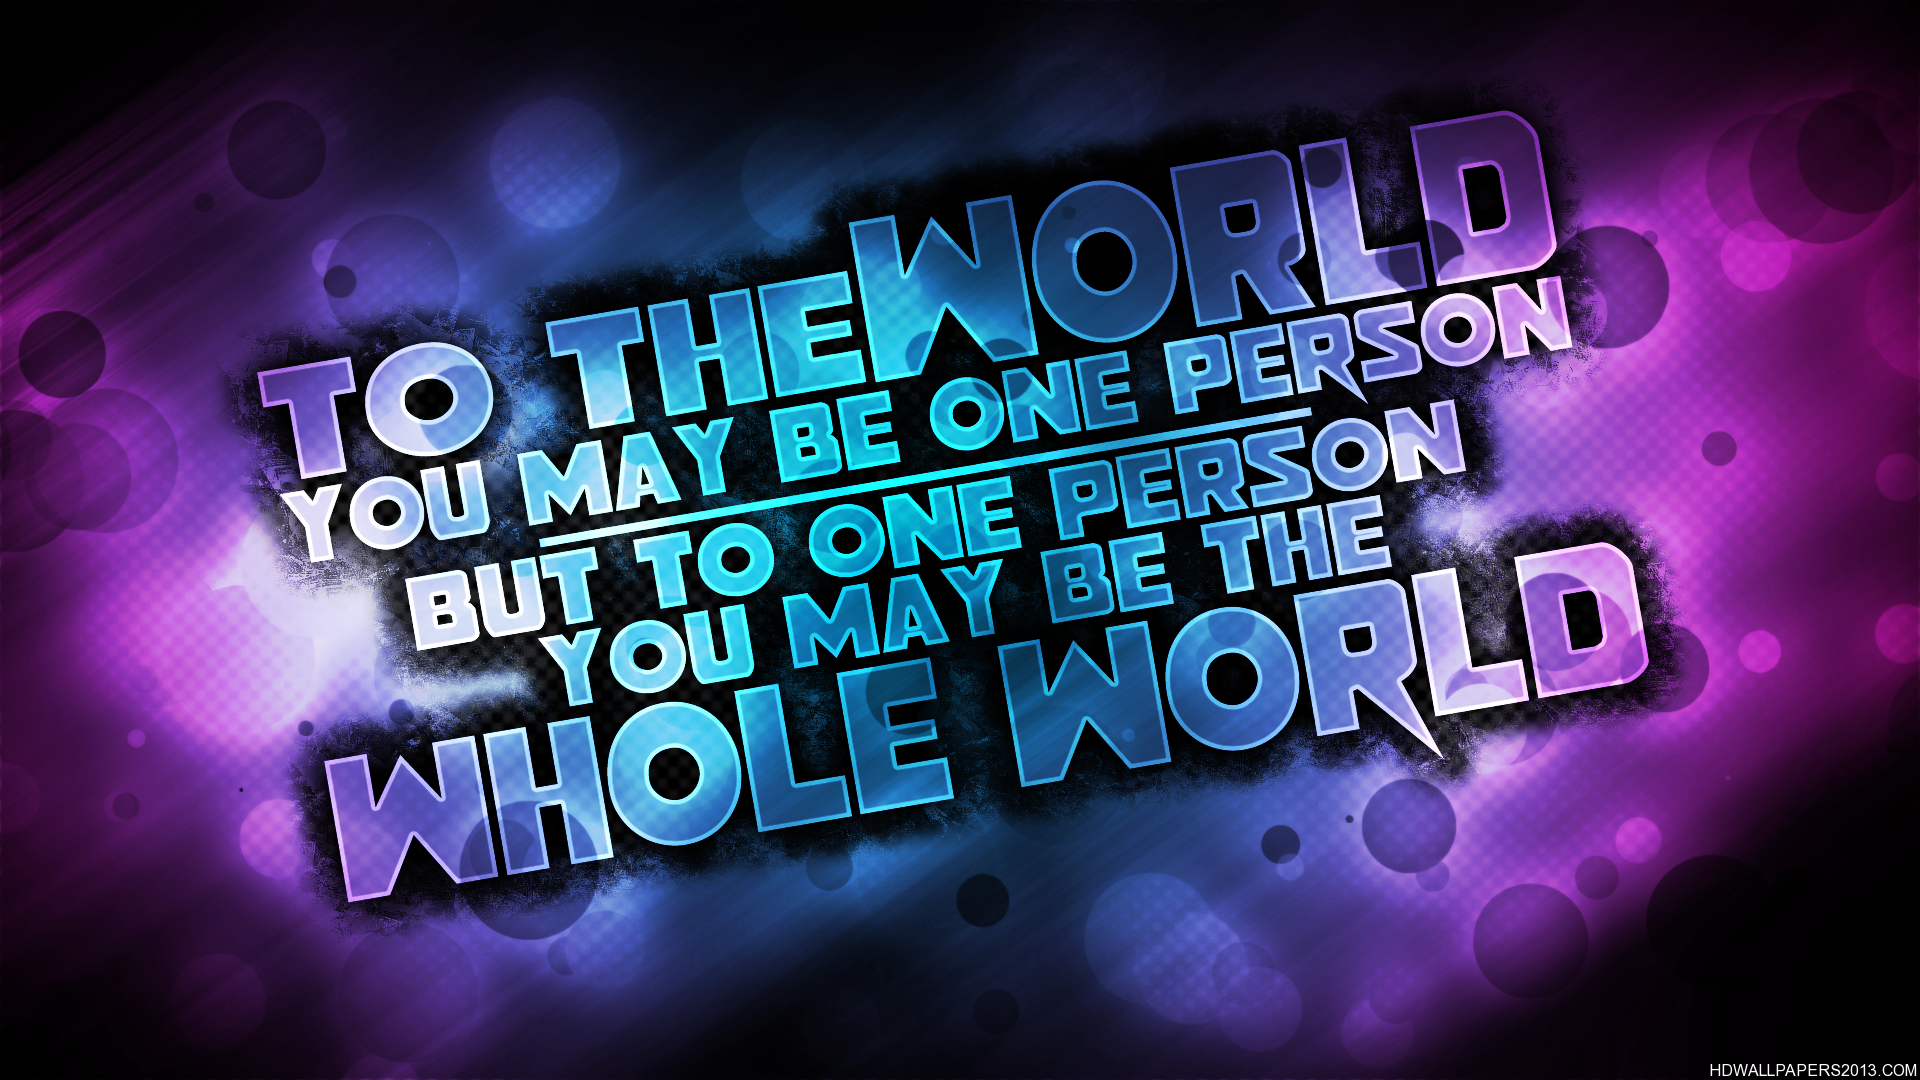 You're My Whole World | High Definition Wallpapers, High ...